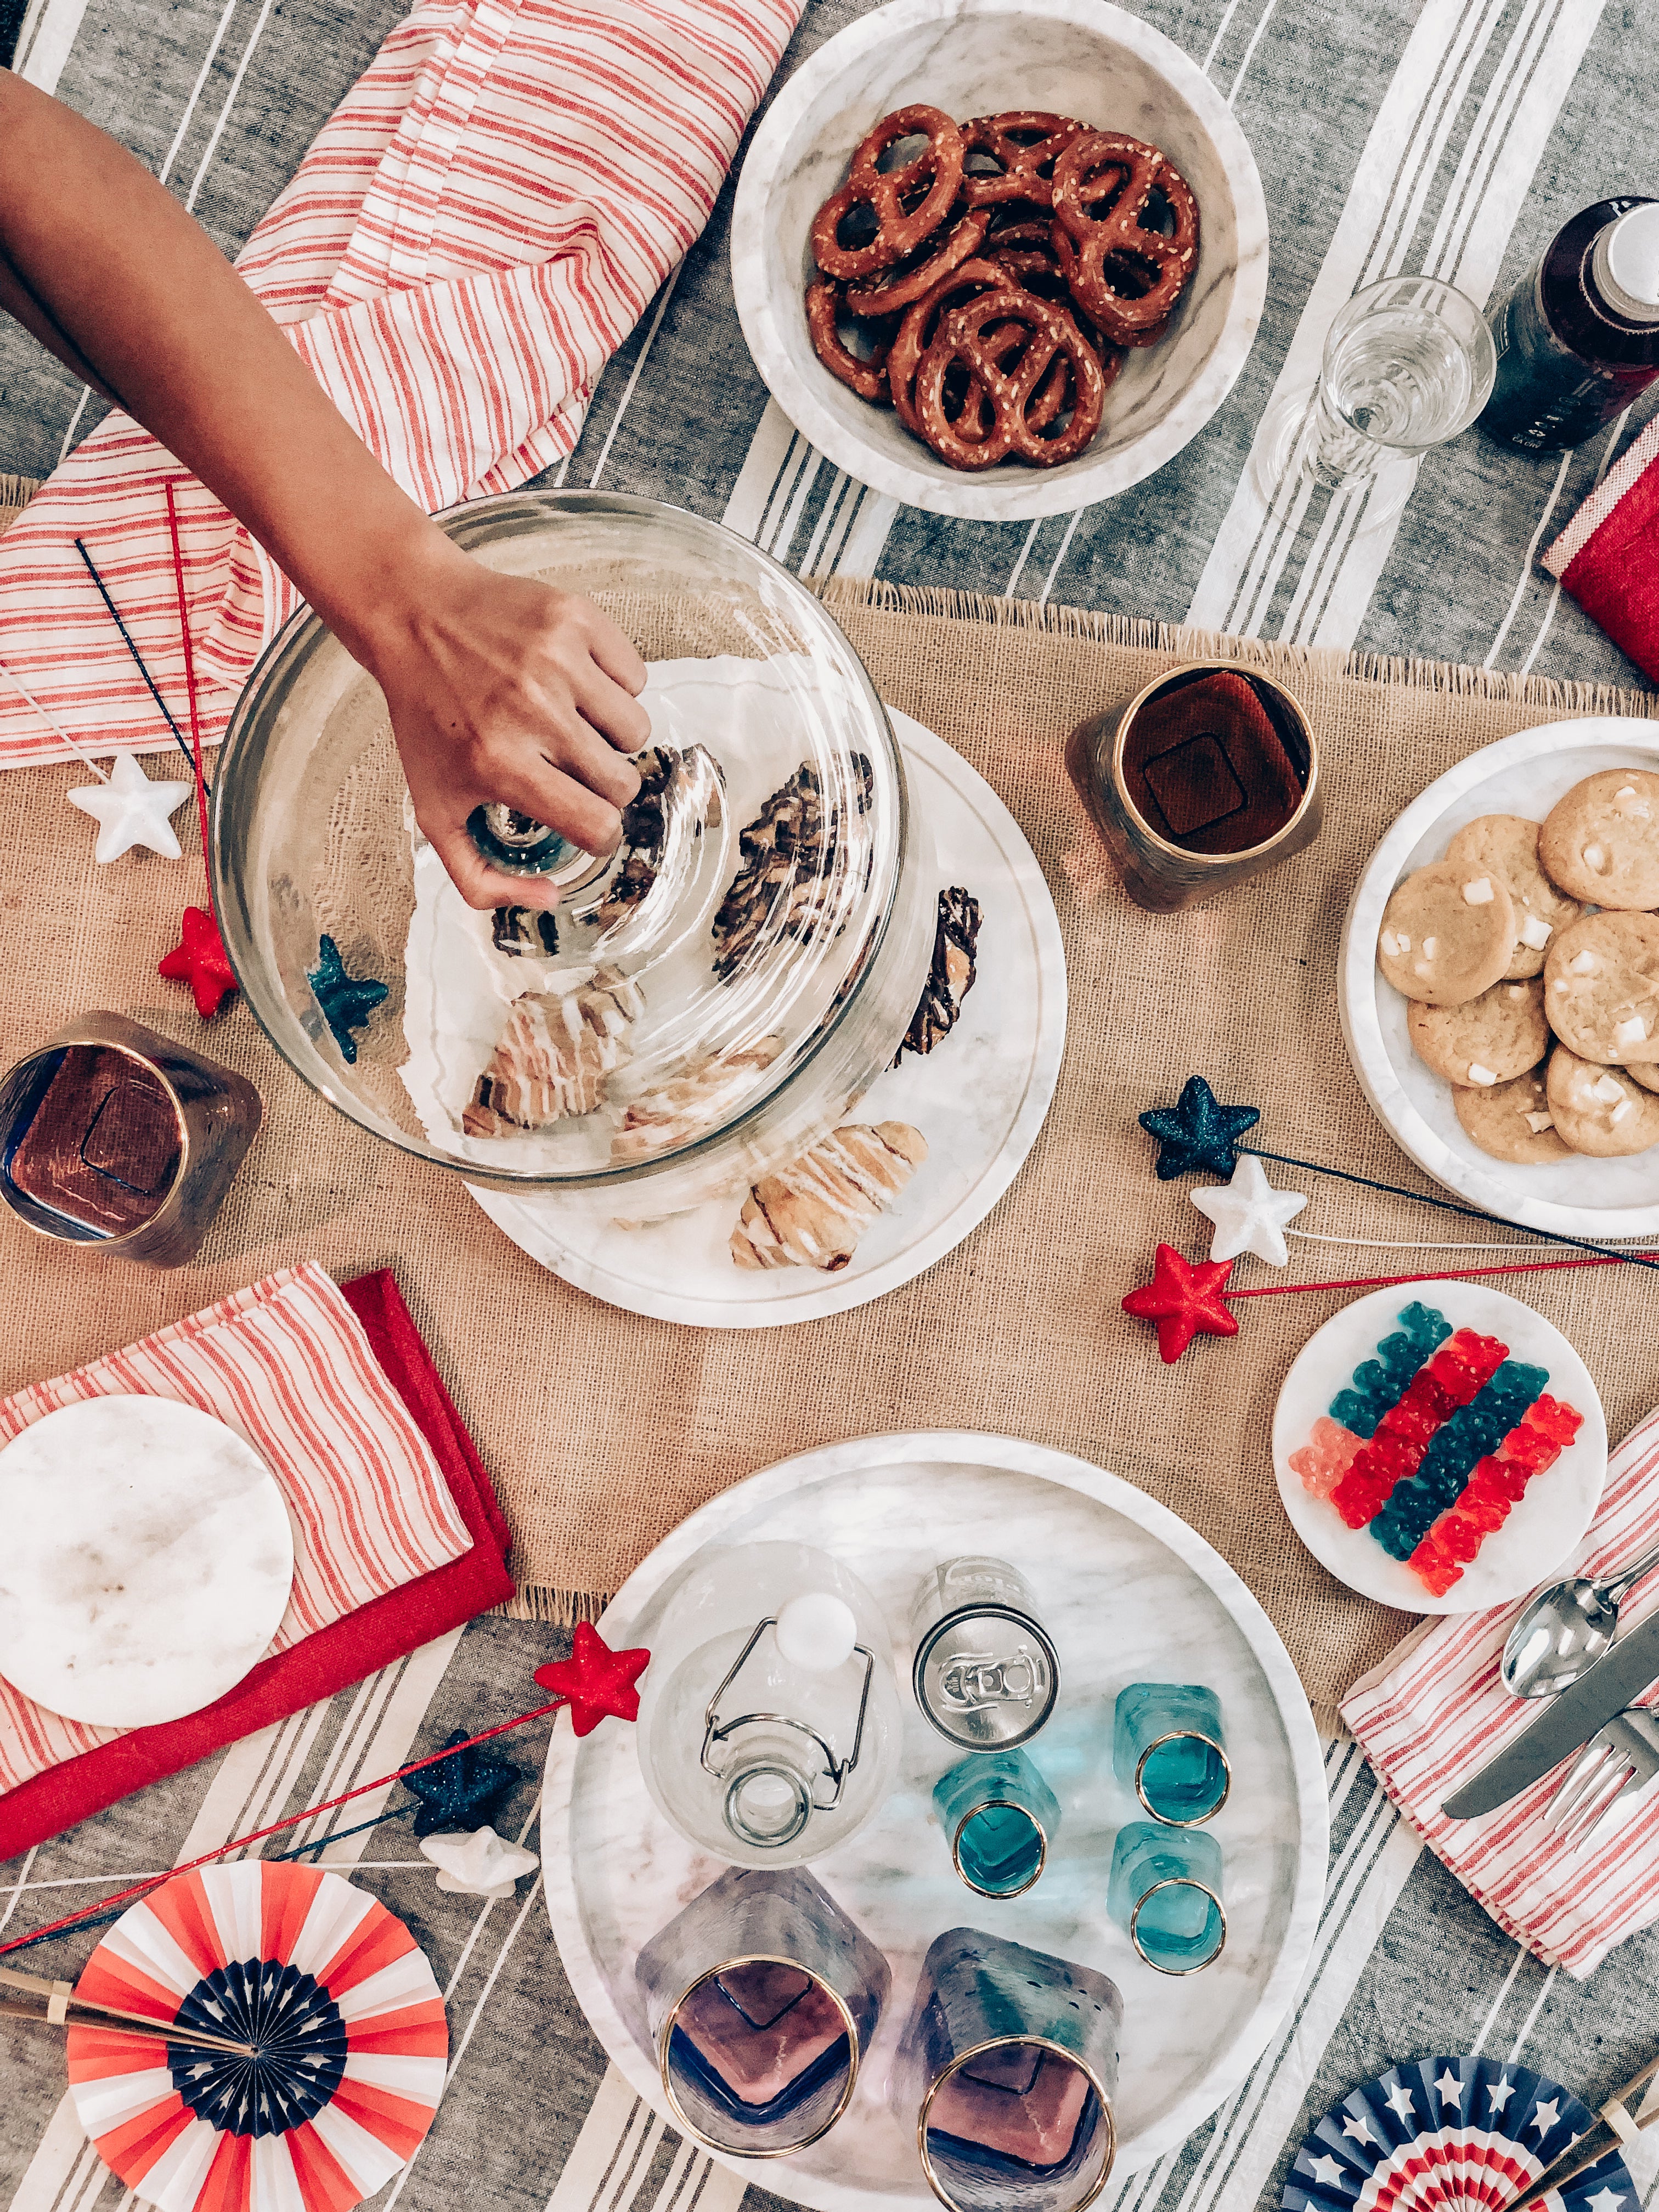 Shop the 4th of July Spread